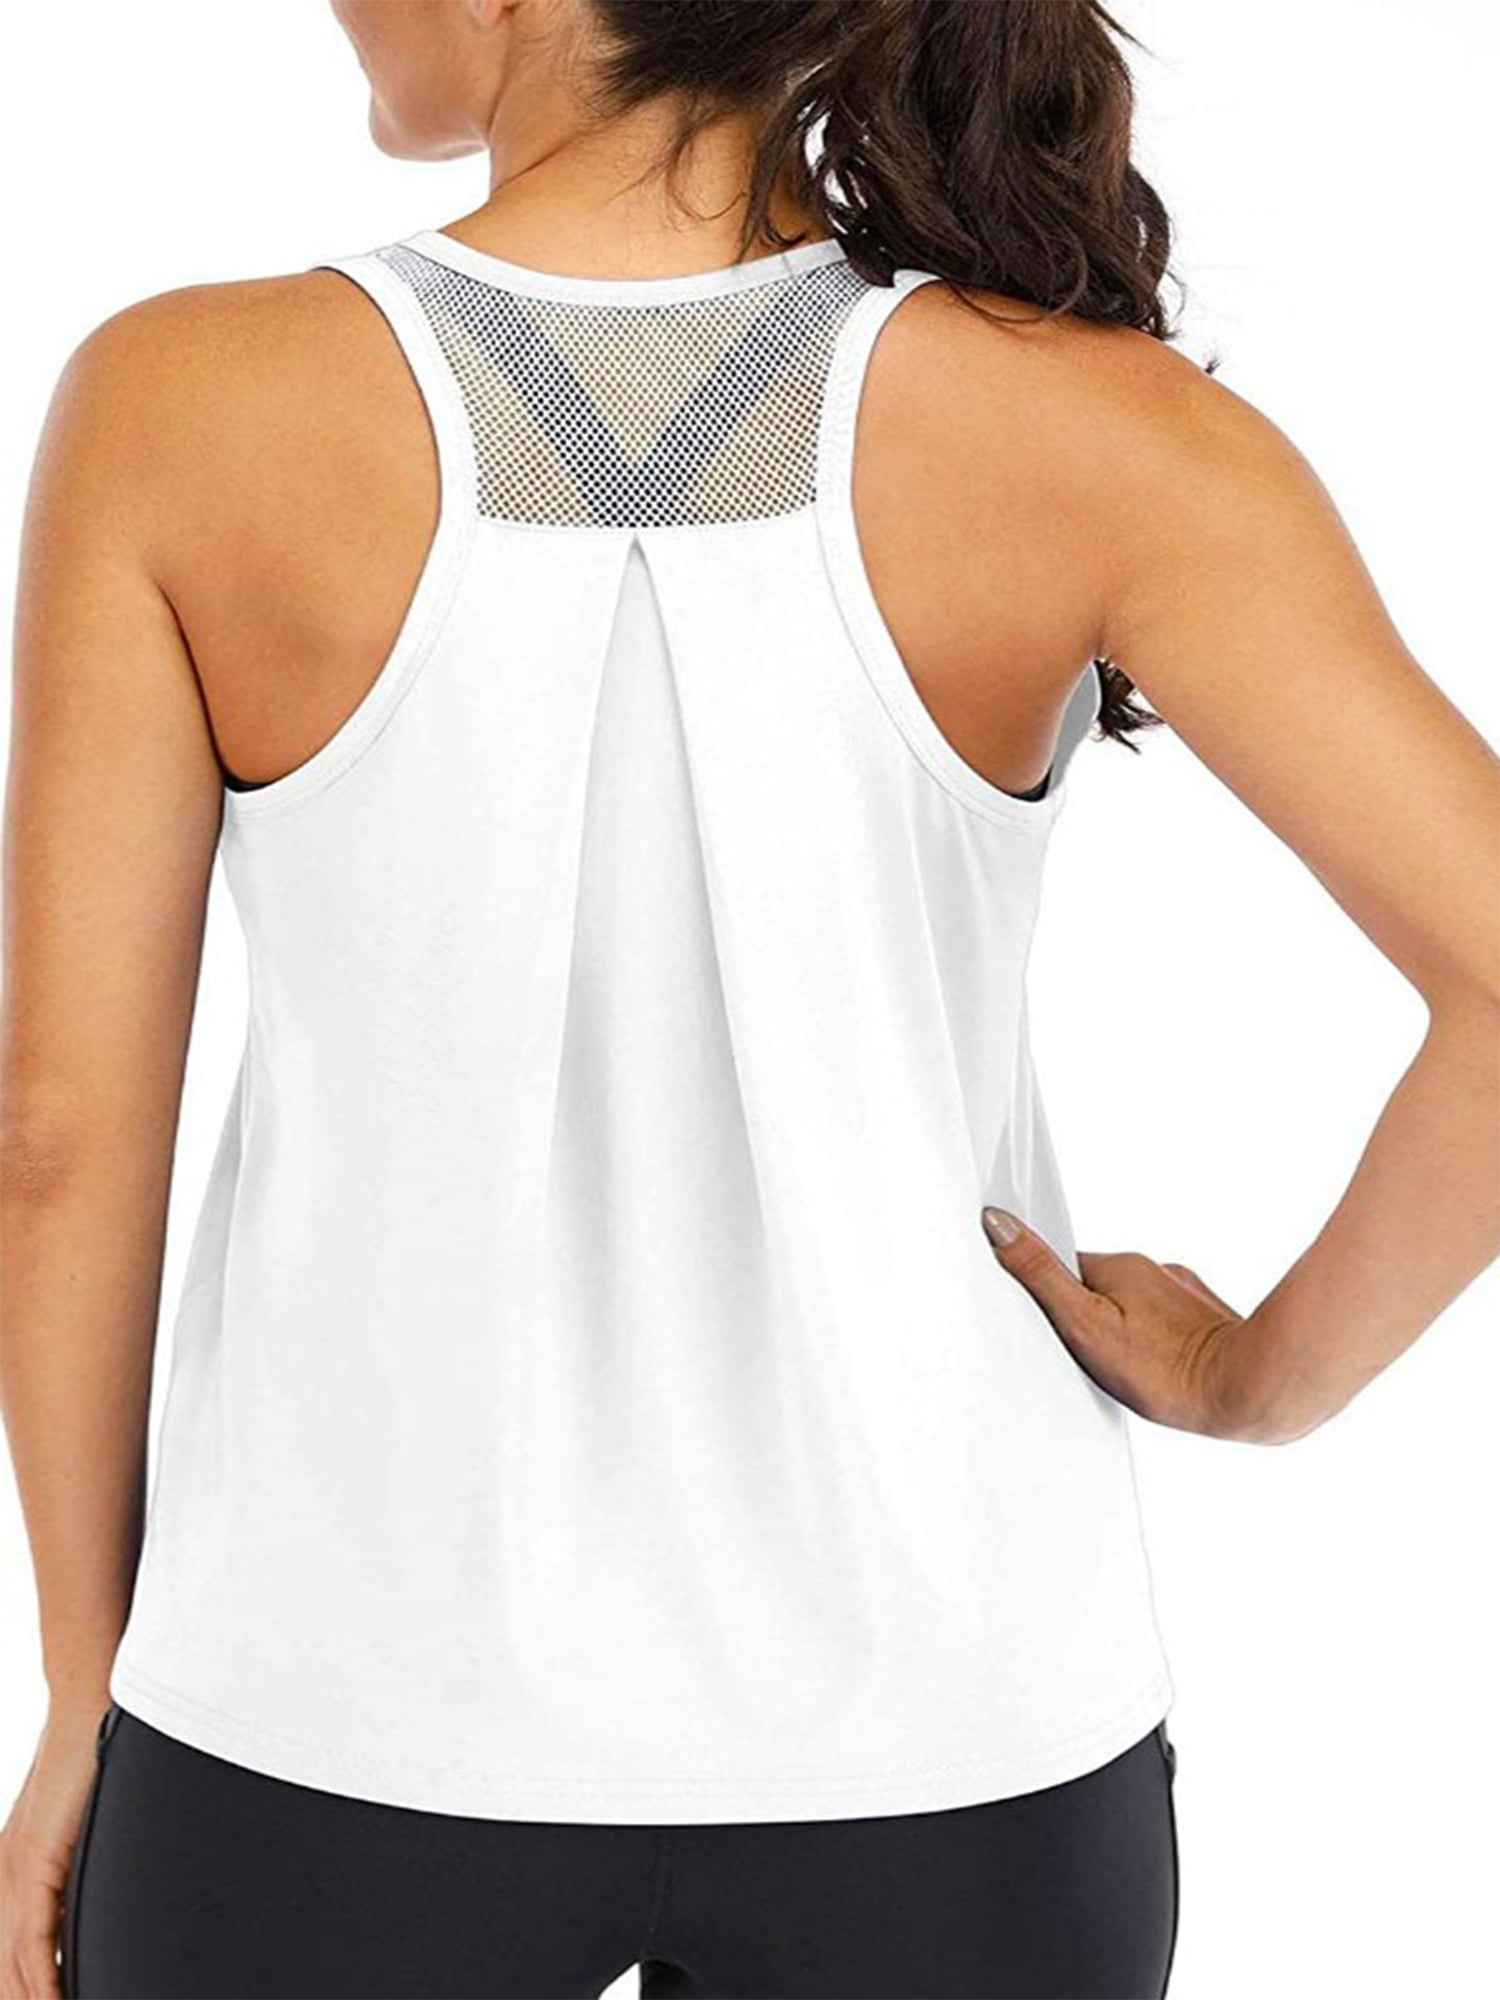 Strappy Cage Back Tank Top Undershirt Active Gym Sports Knit Shirt Sleeveless